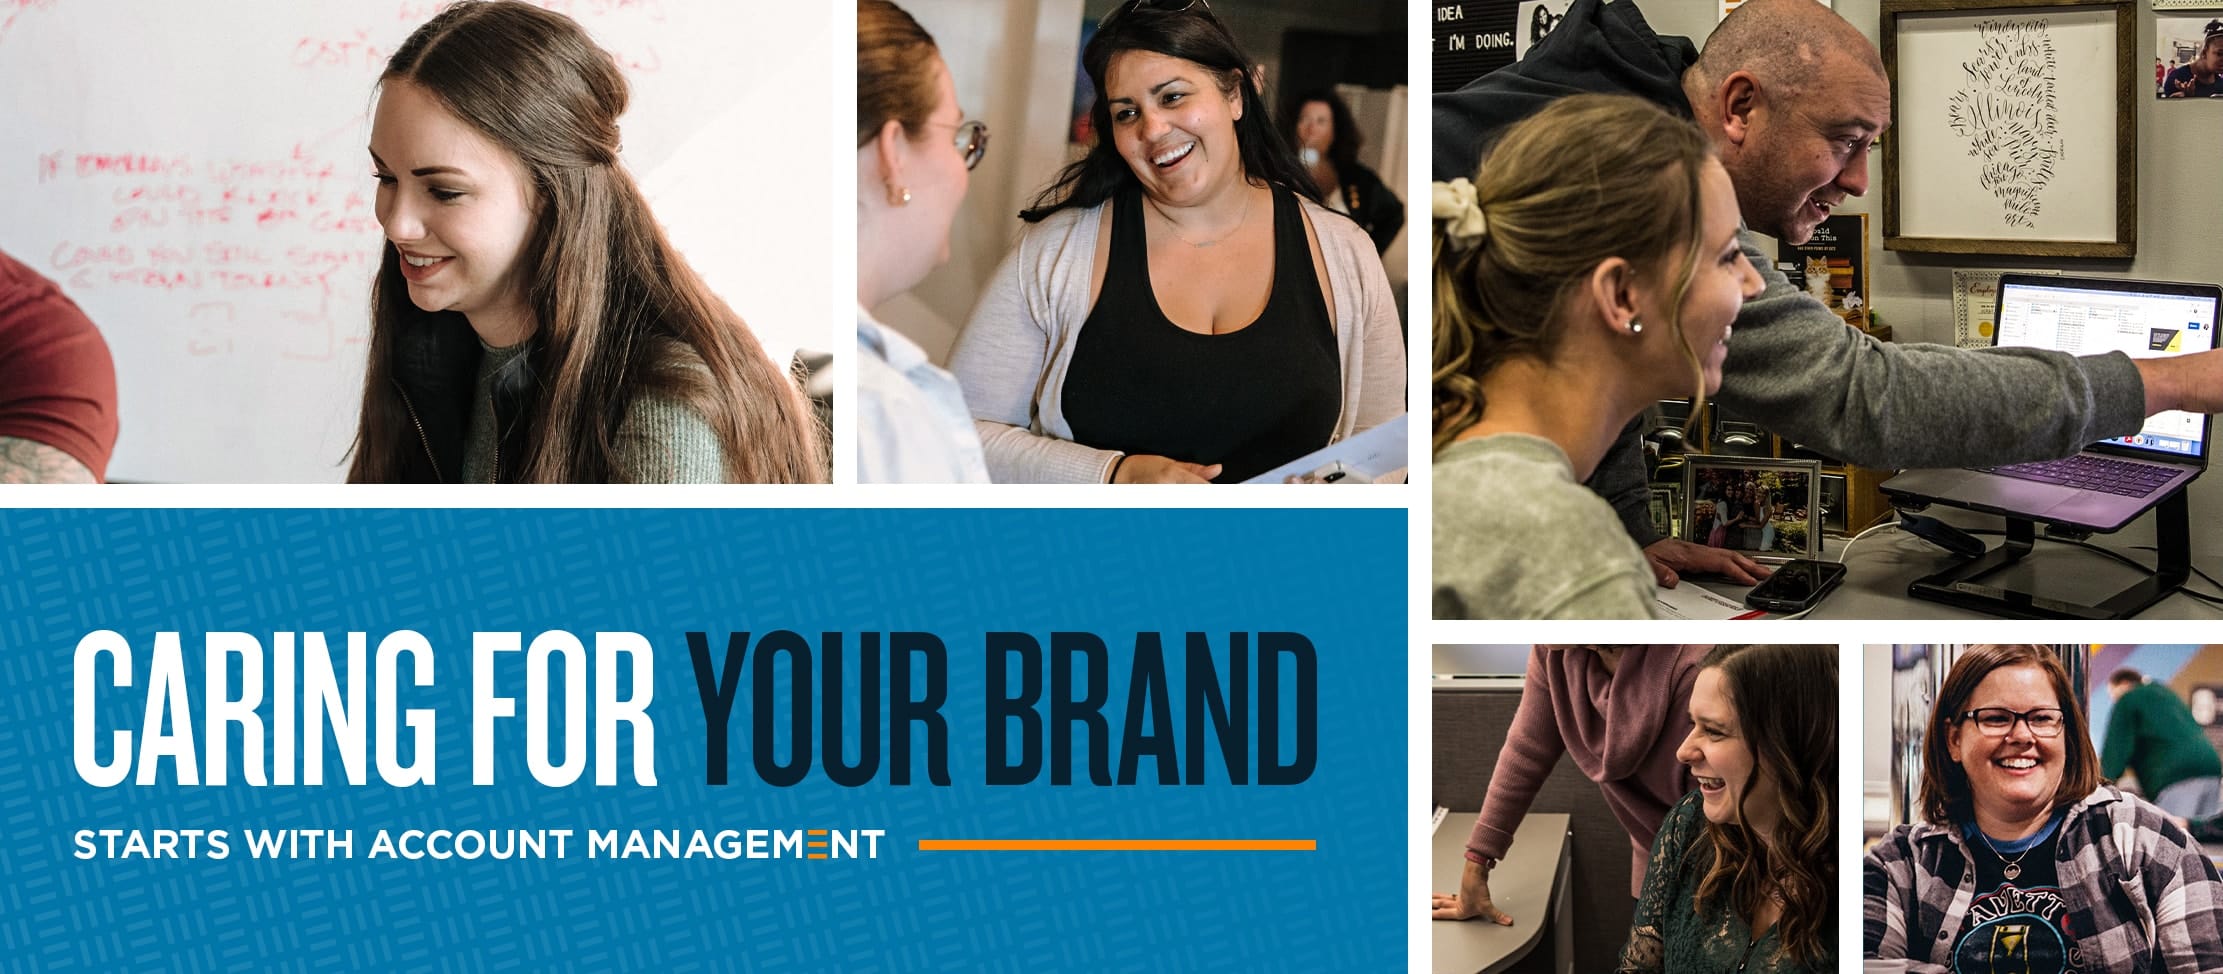 EPIC Blog | Caring for Your Brand Starts with Account Management